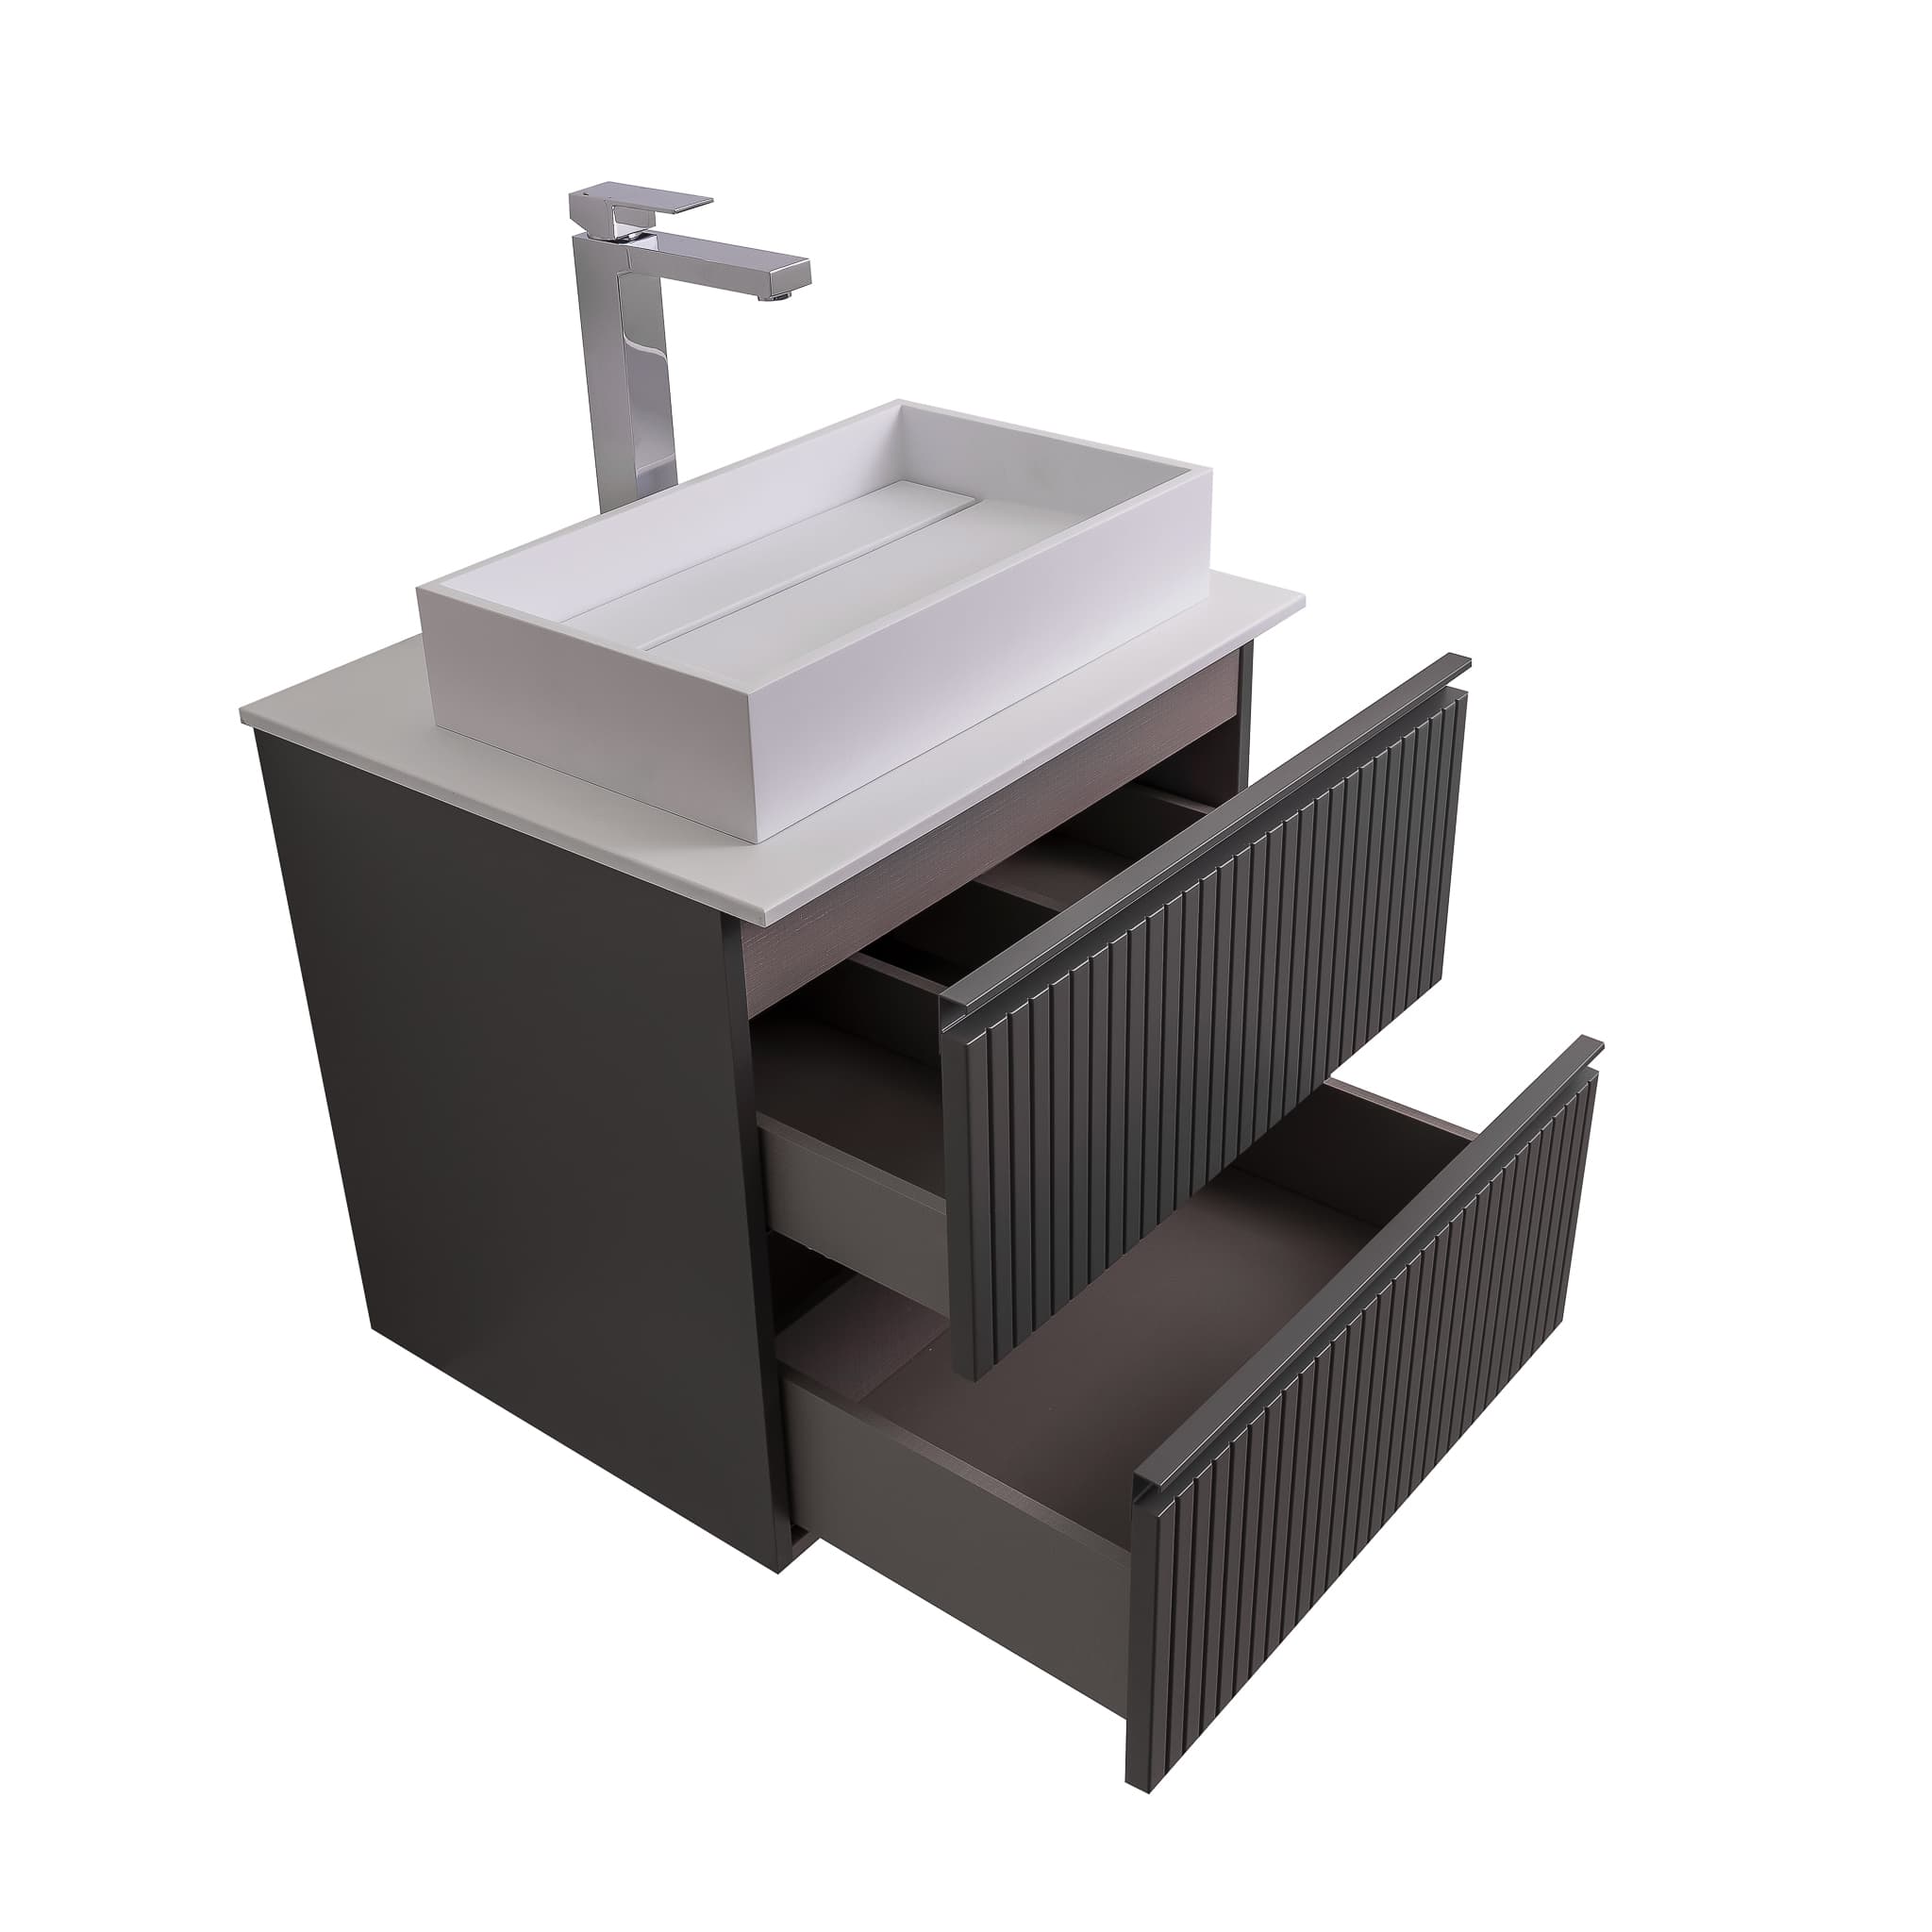 Ares 23.5 Matte Grey Cabinet, Solid Surface Flat White Counter And Infinity Square Solid Surface White Basin 1329, Wall Mounted Modern Vanity Set